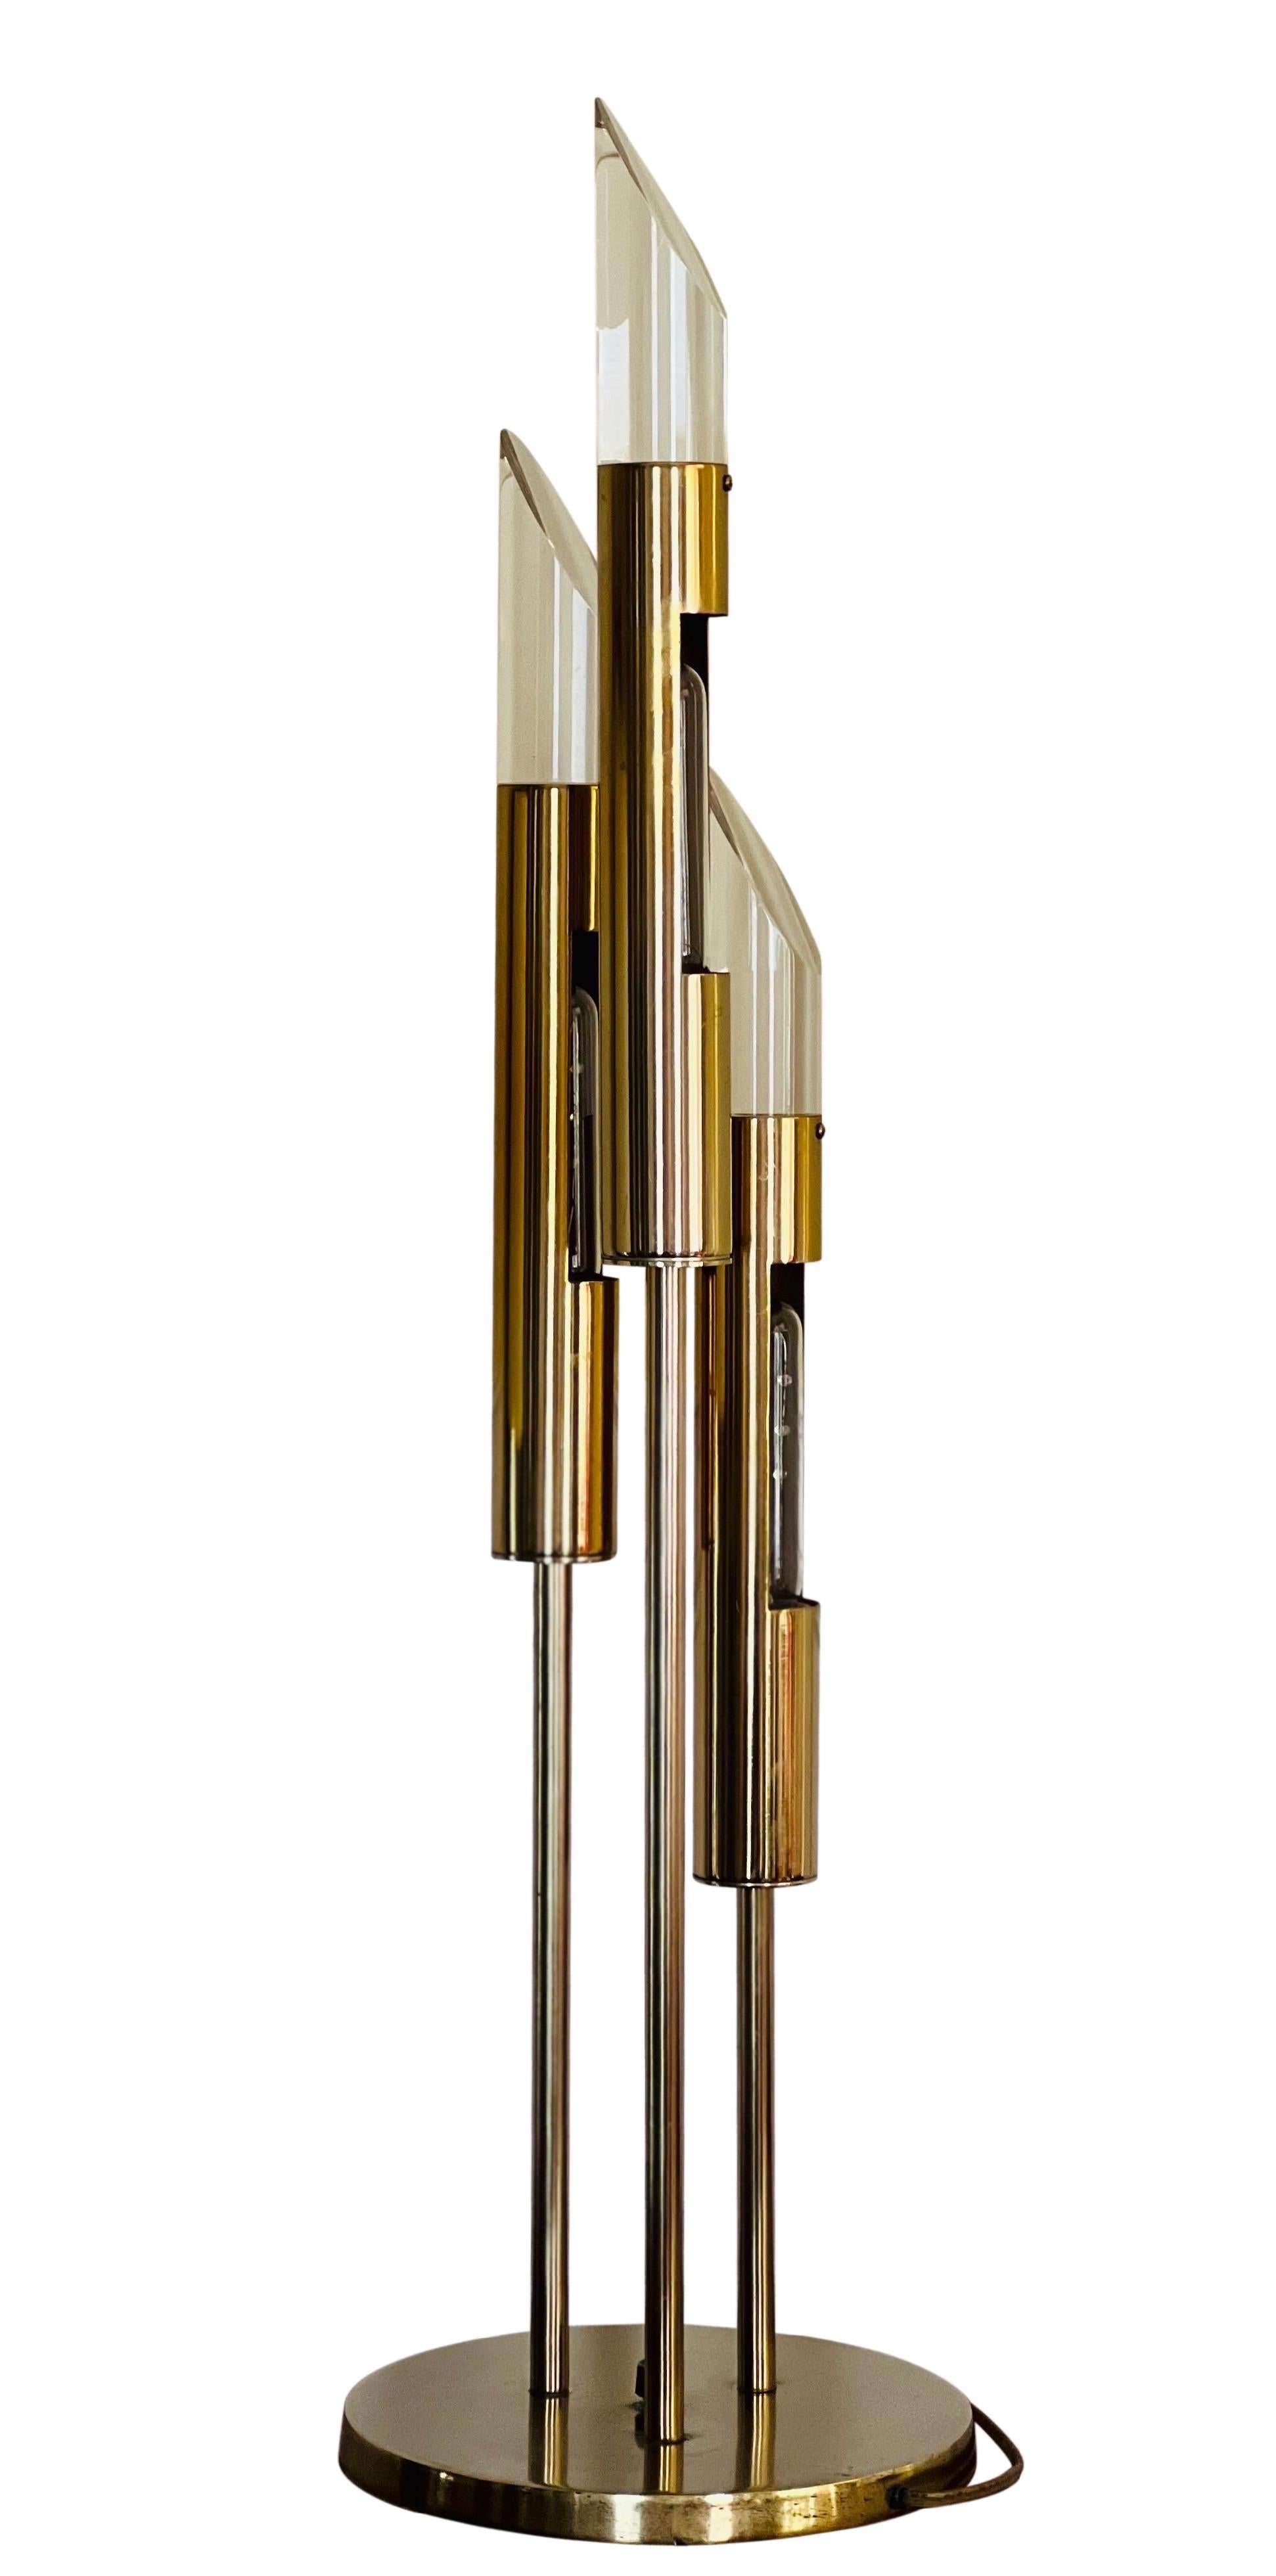 Spectacular vintage modern Italian Space Age table lamp, 1970's.

The lamp features three graduated, tubular shaped lights with slanted lucite tips. It is a combination of brass and brass plated metal. On/off switch is in the center of the base. A